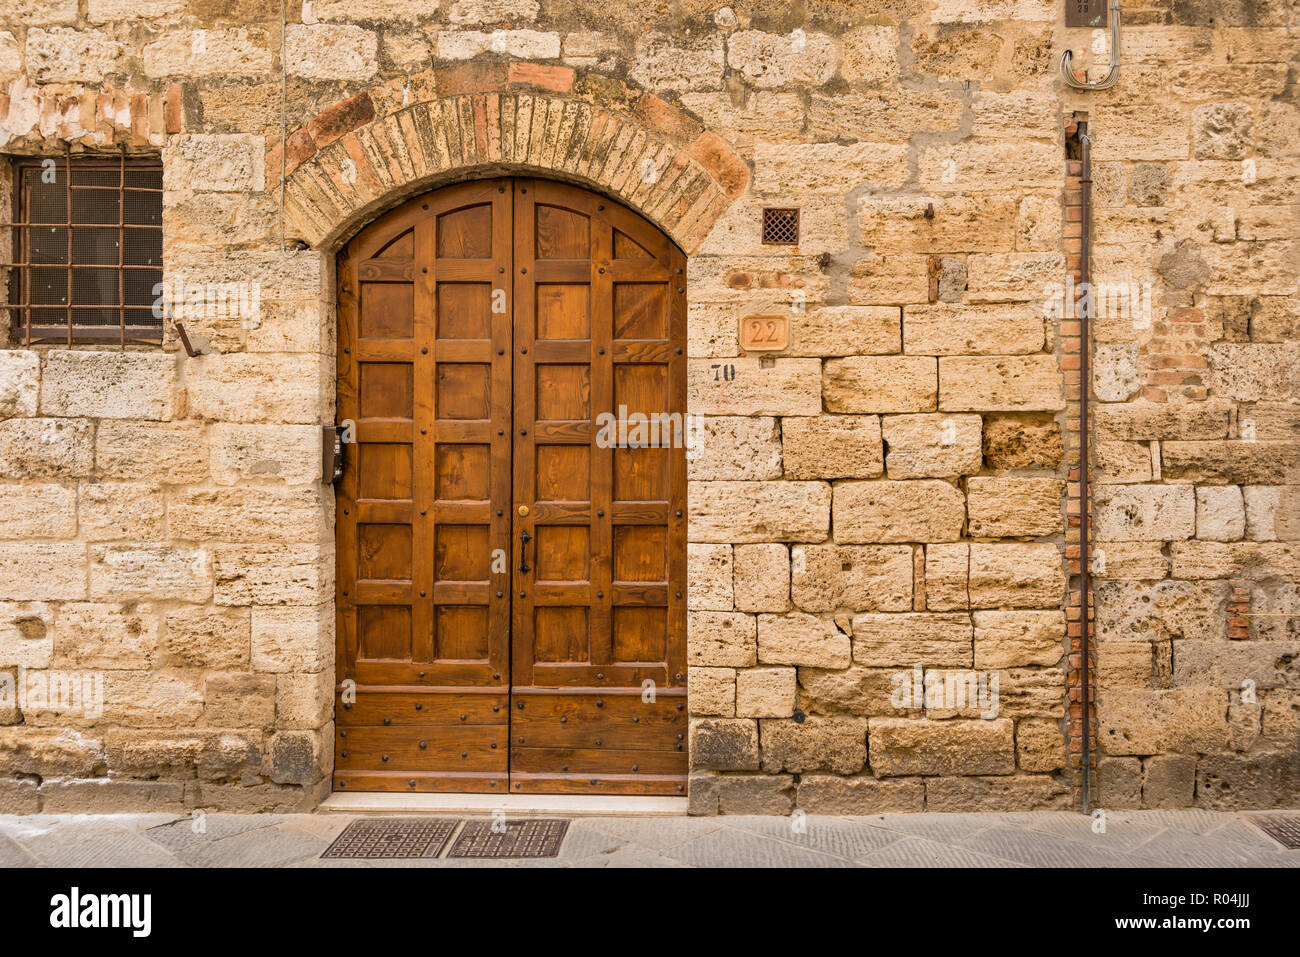 Old ornate wooden dooor of ancient stone building, hilltop town of San Gimignano, Tuscany, Italy Stock Photo